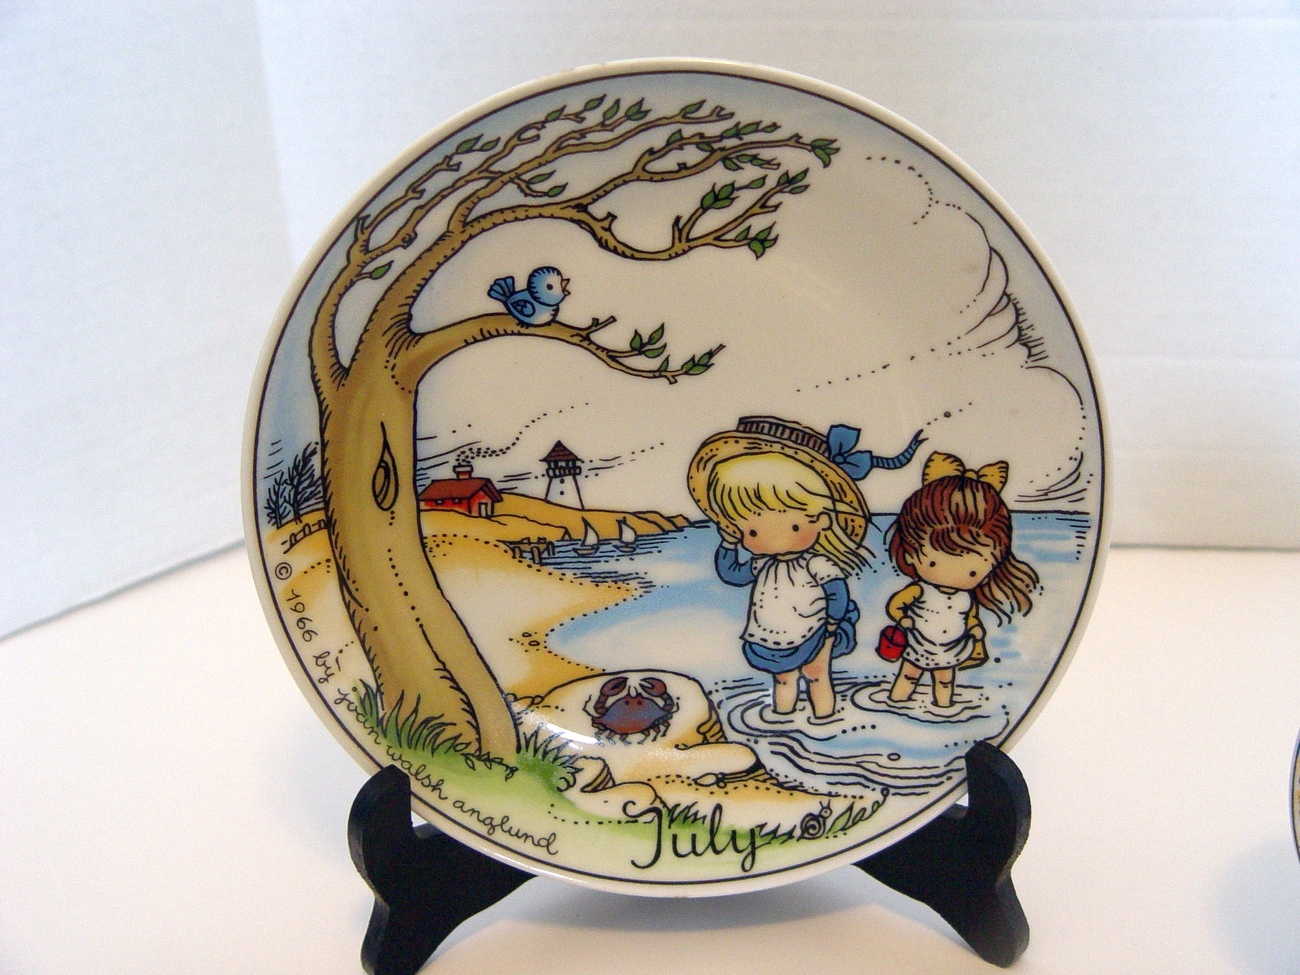  Two Signed  Joan Walsh Anglund Collector Plates  (July) West Germany  - $89.00